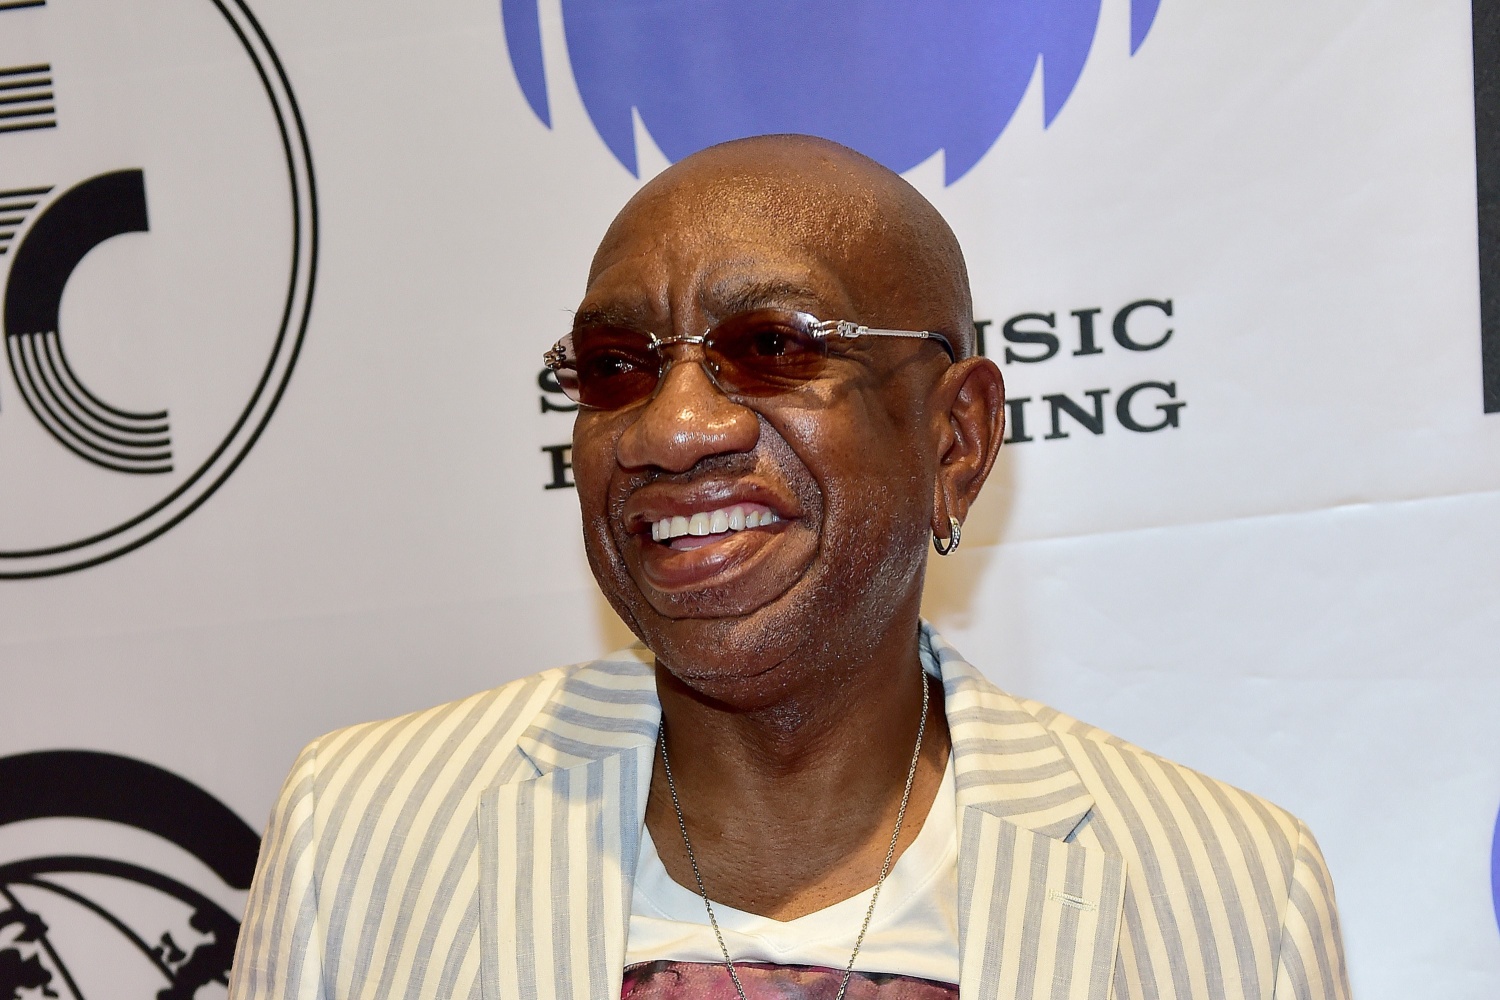 Guitarist Otis Redding III Dead at 59: What Was His Cause of Death?